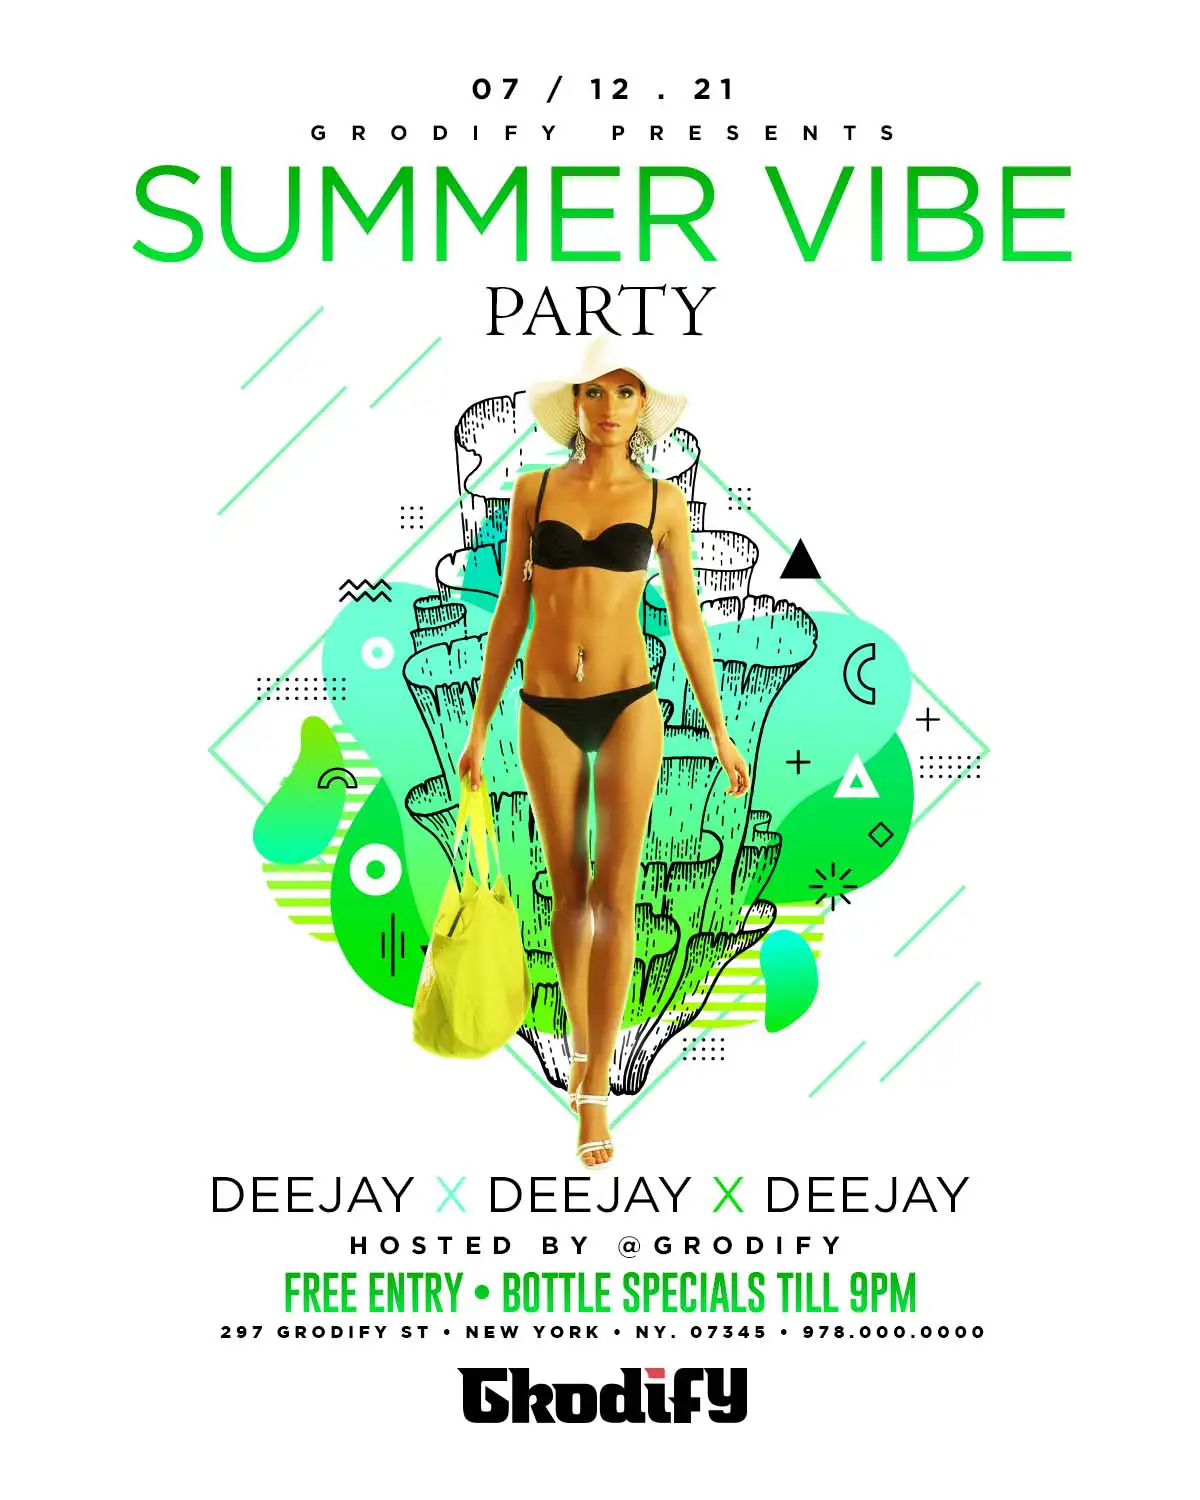 Summer Vibe Party